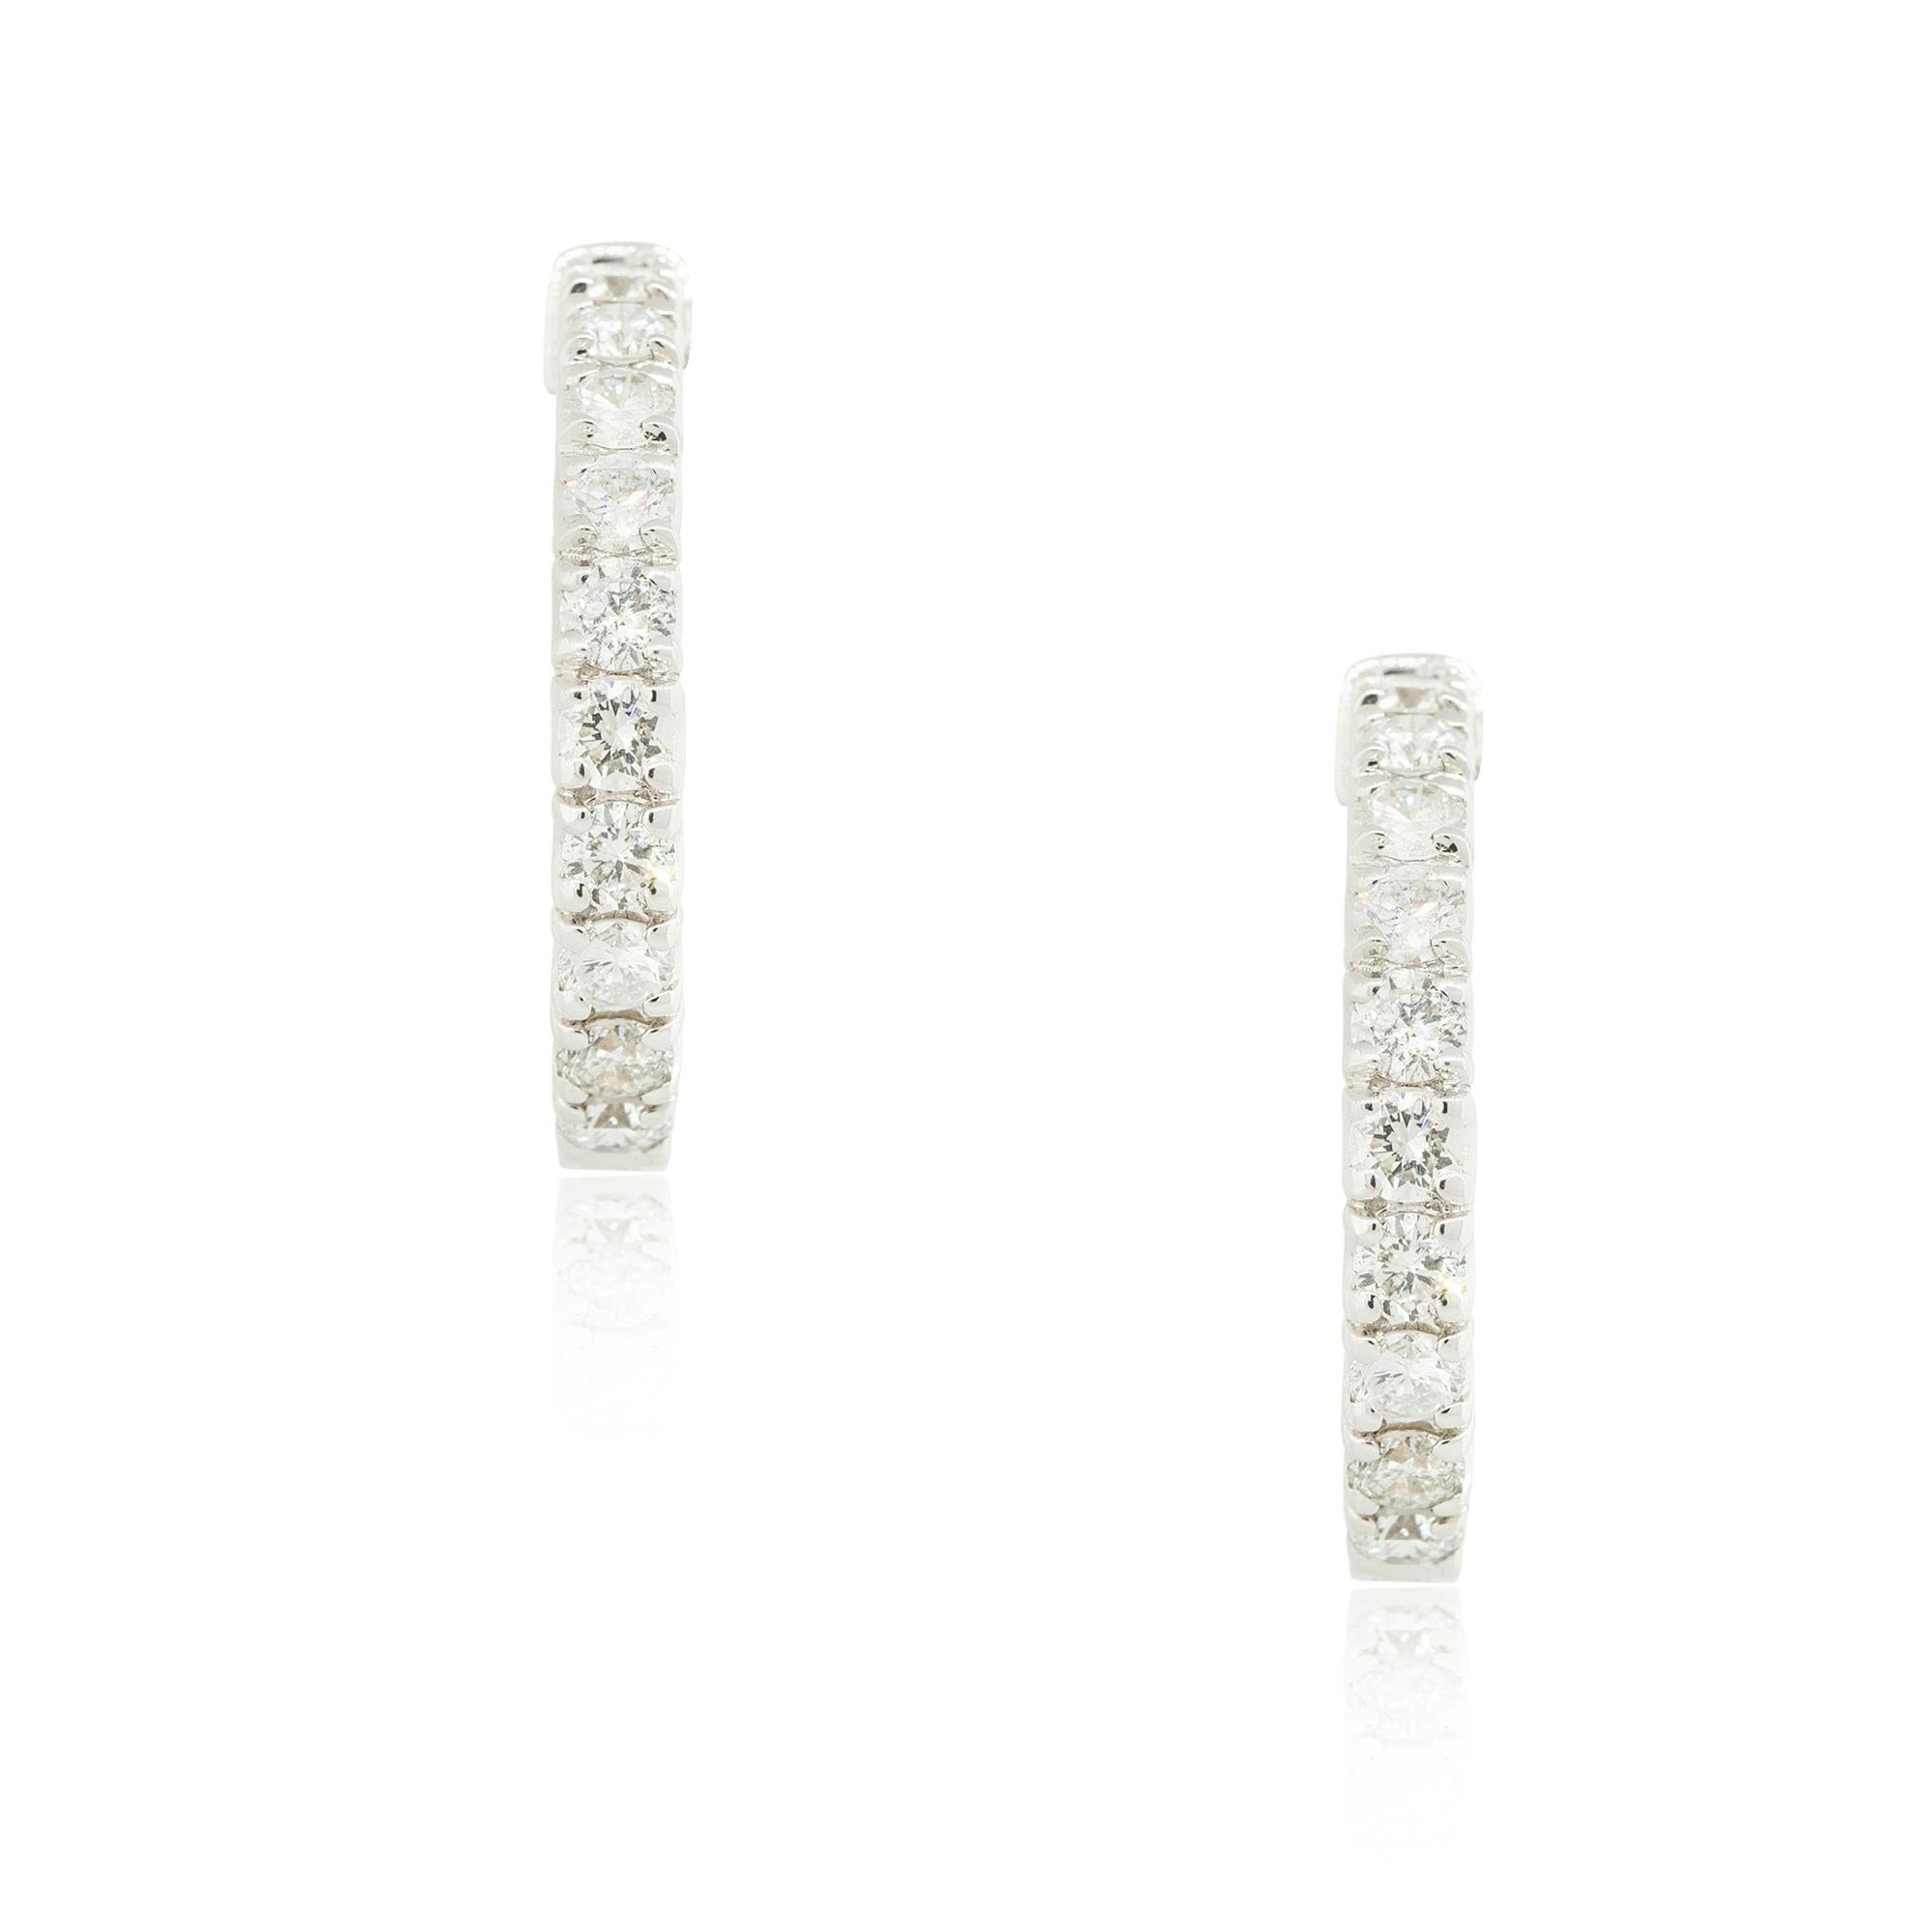 Material: 14k White Gold
Stone/Diamond Details: Approx. 3.0ctw of Diamonds. Diamonds are H/I in color and SI in clarity
Total Weight: 5.6dwt 
Earring Backs: Latch Backs
Additional Details: This item comes with a presentation box!
SKU: A30315652